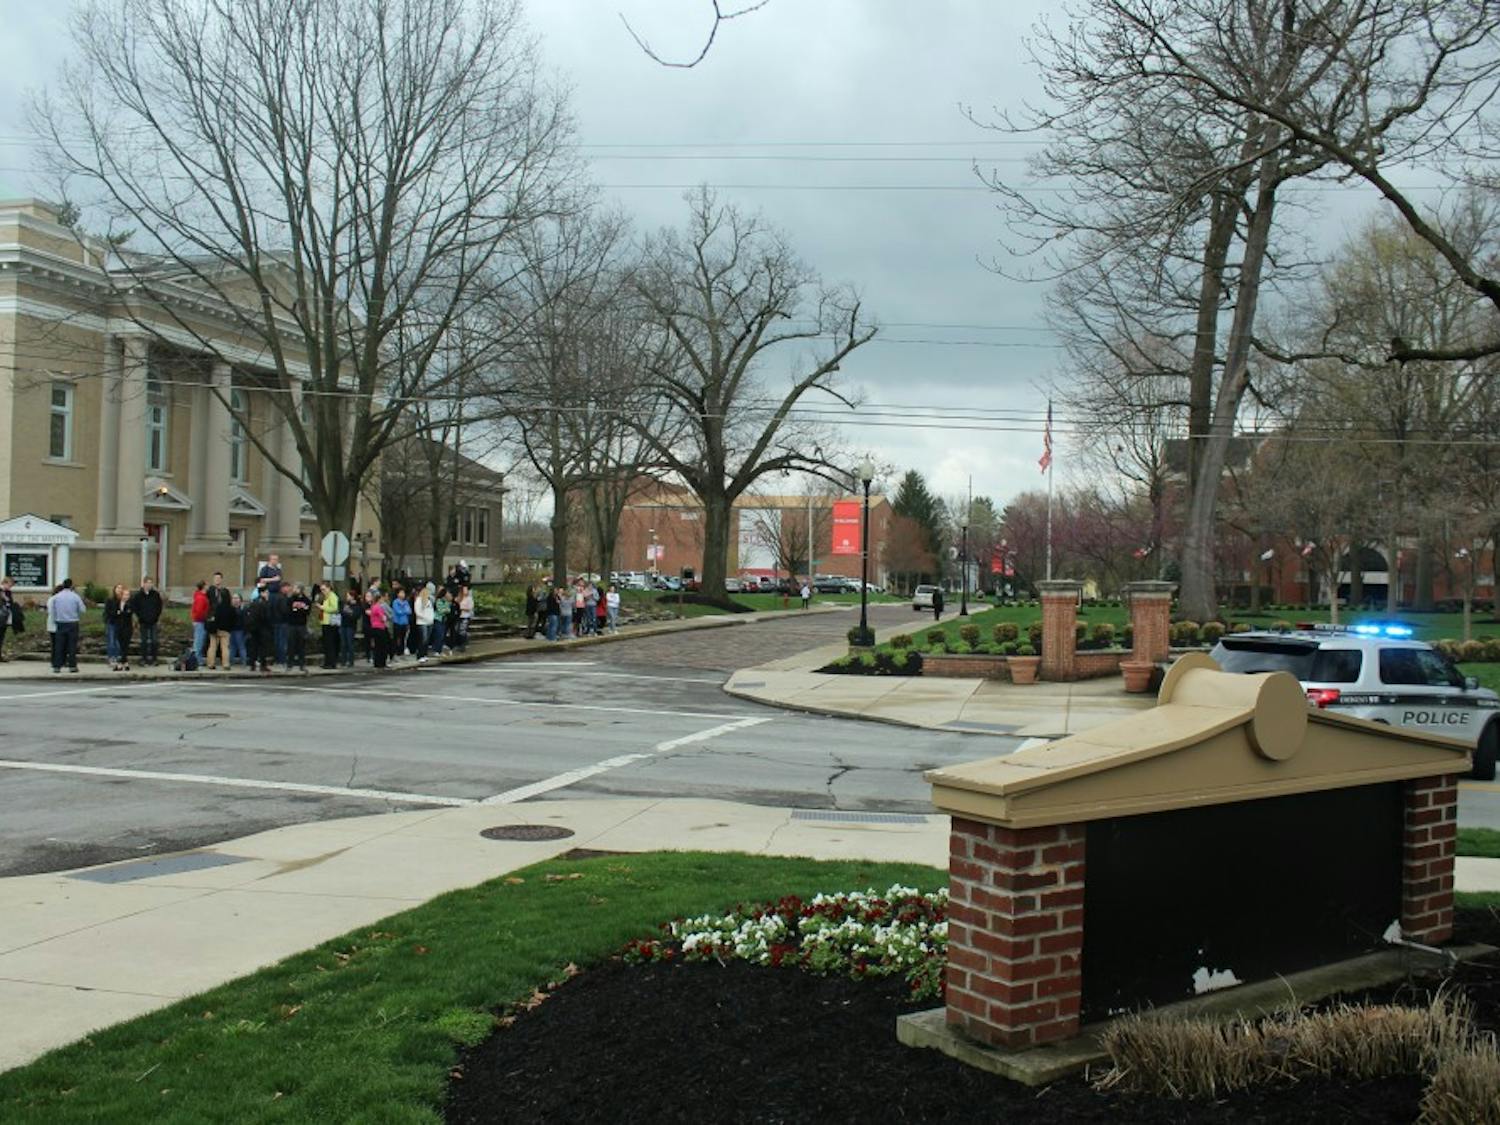 Students evacuated from the science building waited to hear if classes would be canceled.